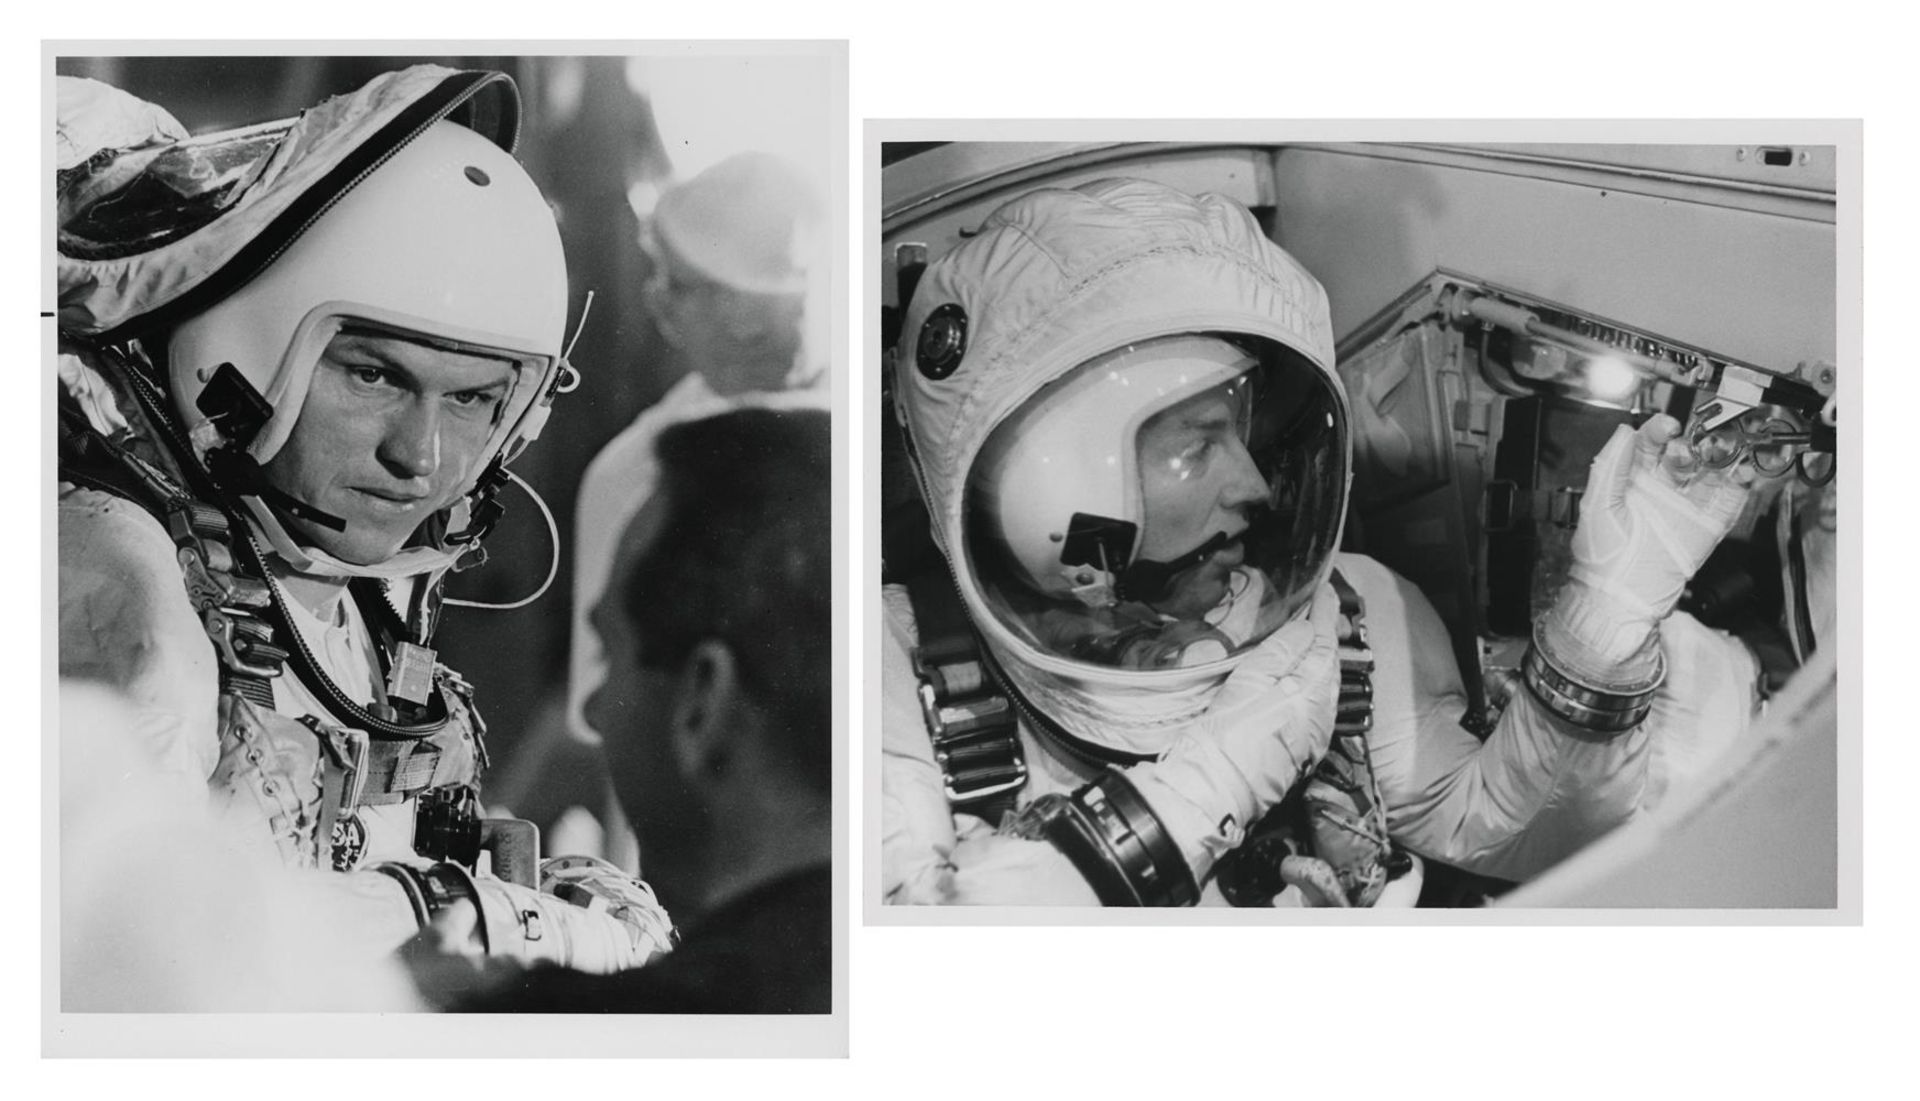 Two views of James Lovell and Frank Borman before the launch of their epic 14-day mission